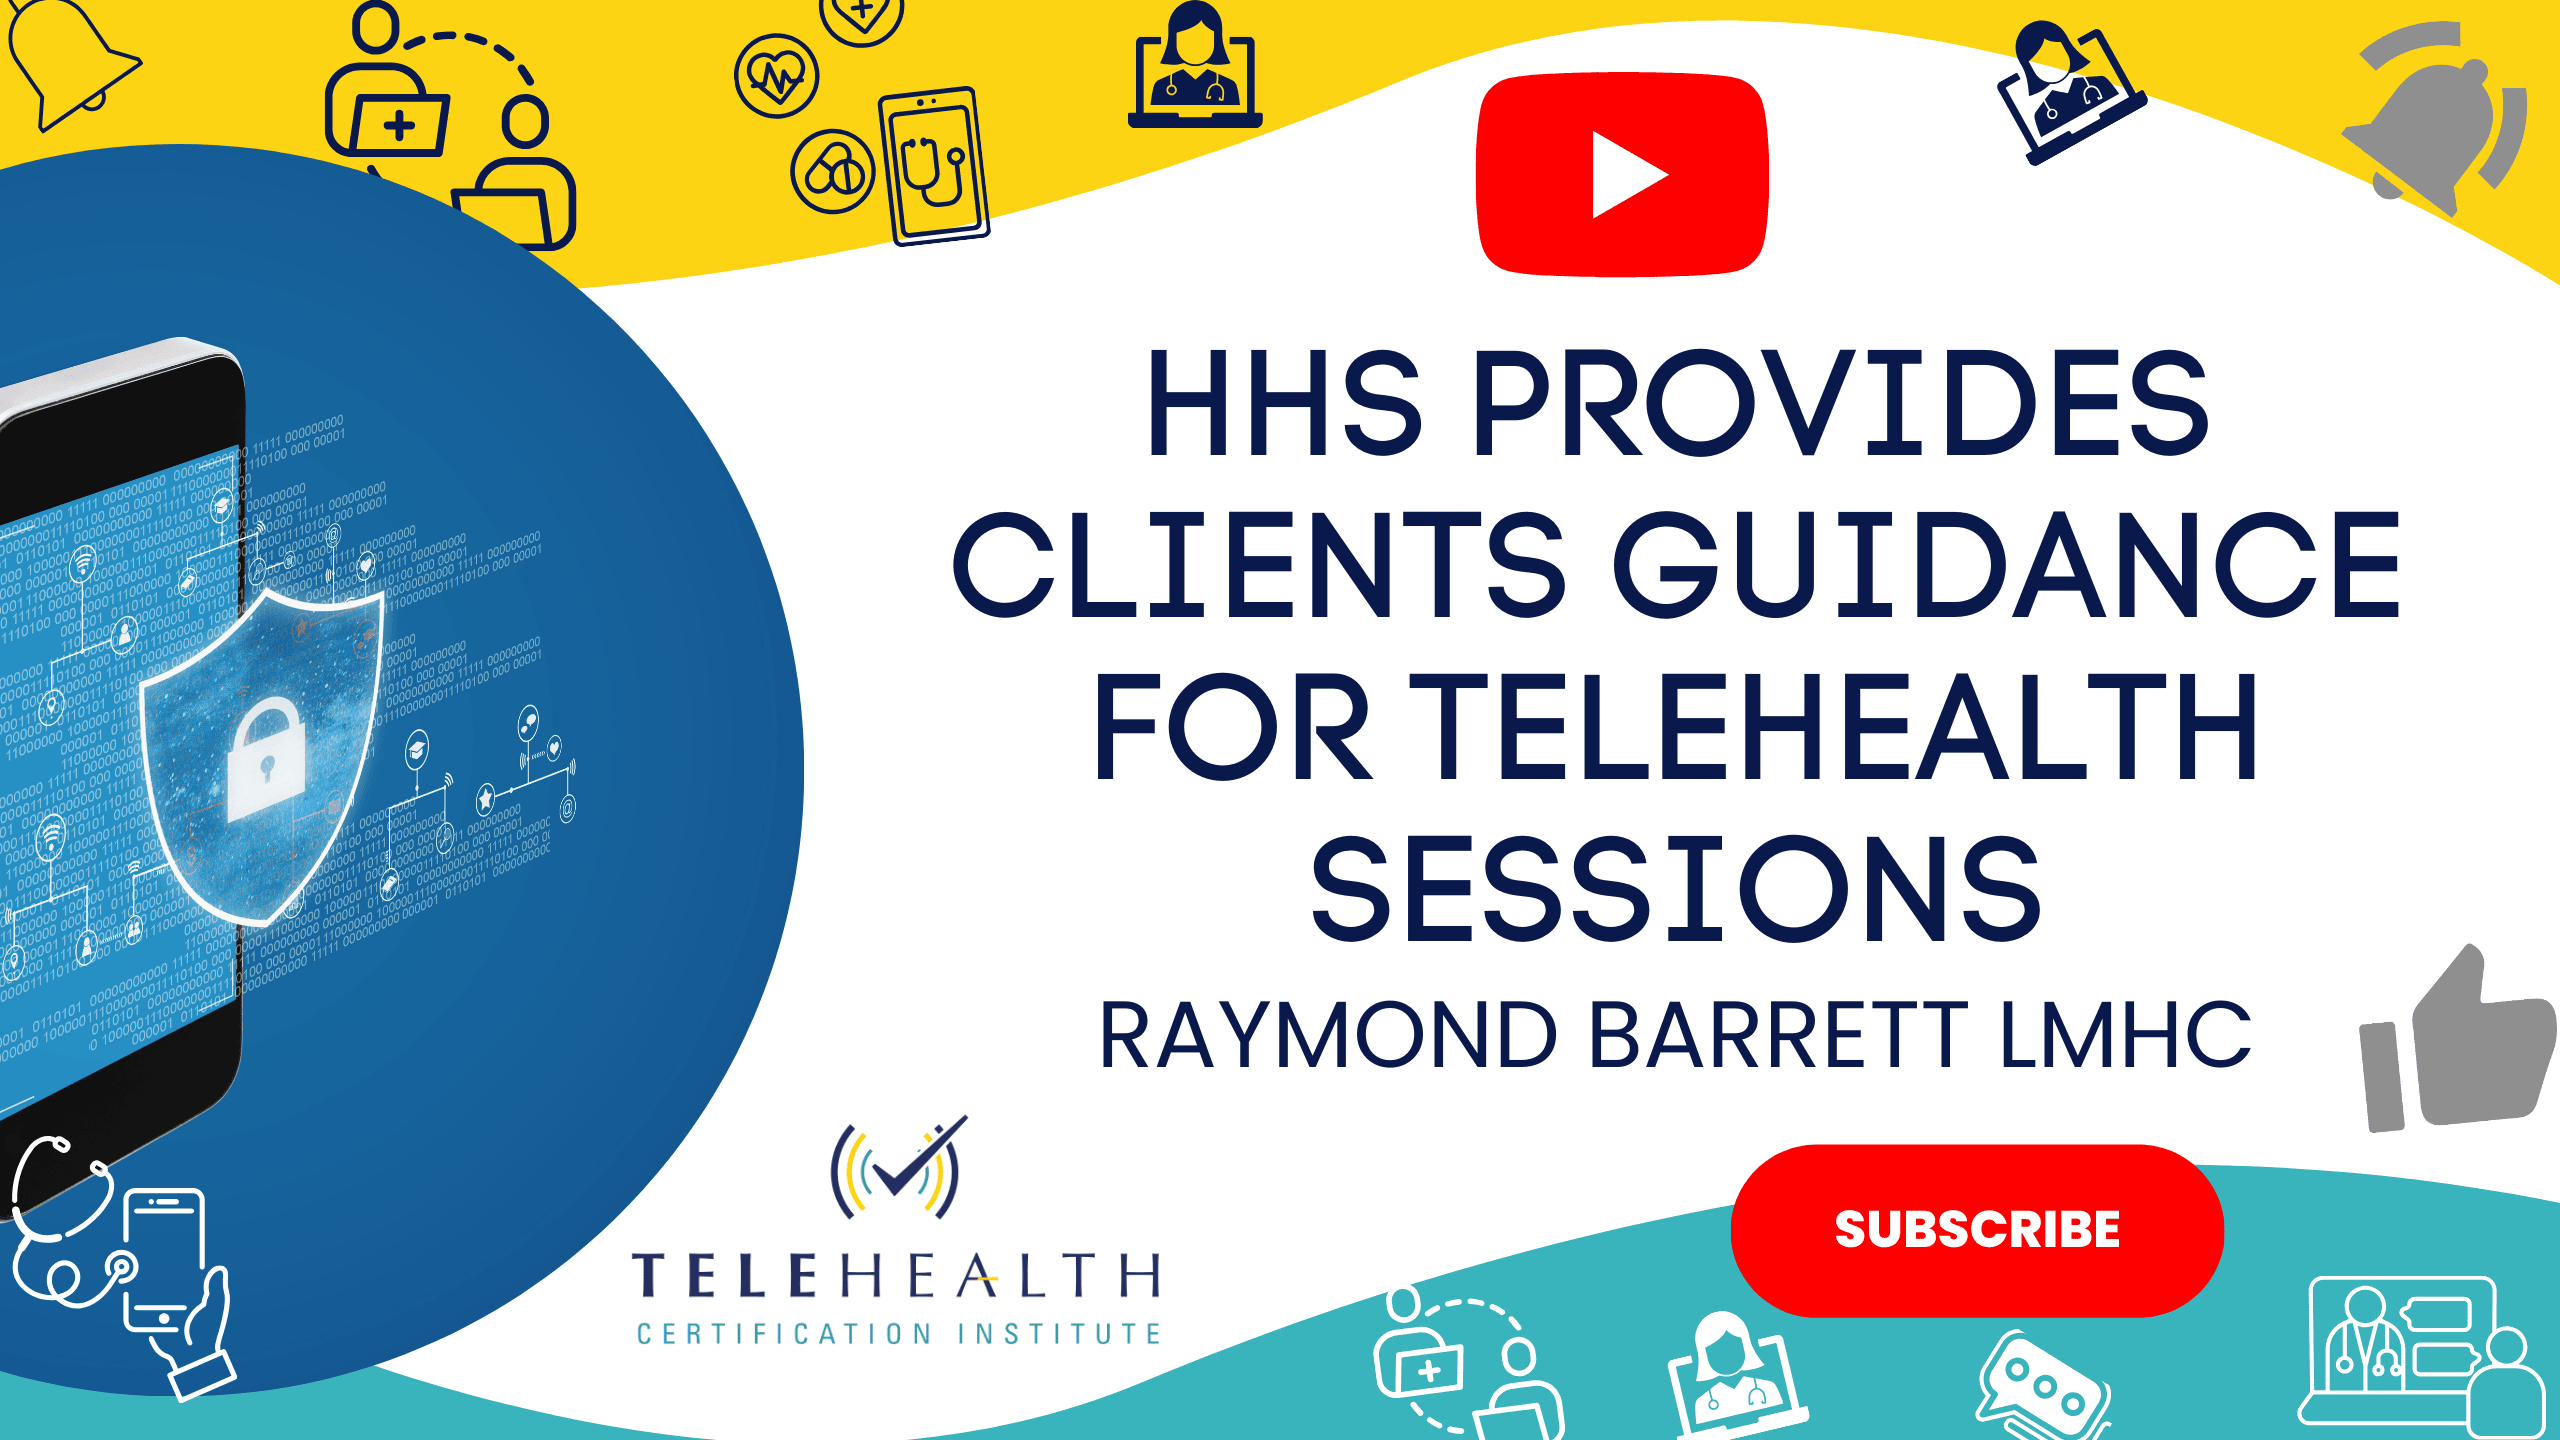 HHS Provides Guidance for Telehealth Sessions Review